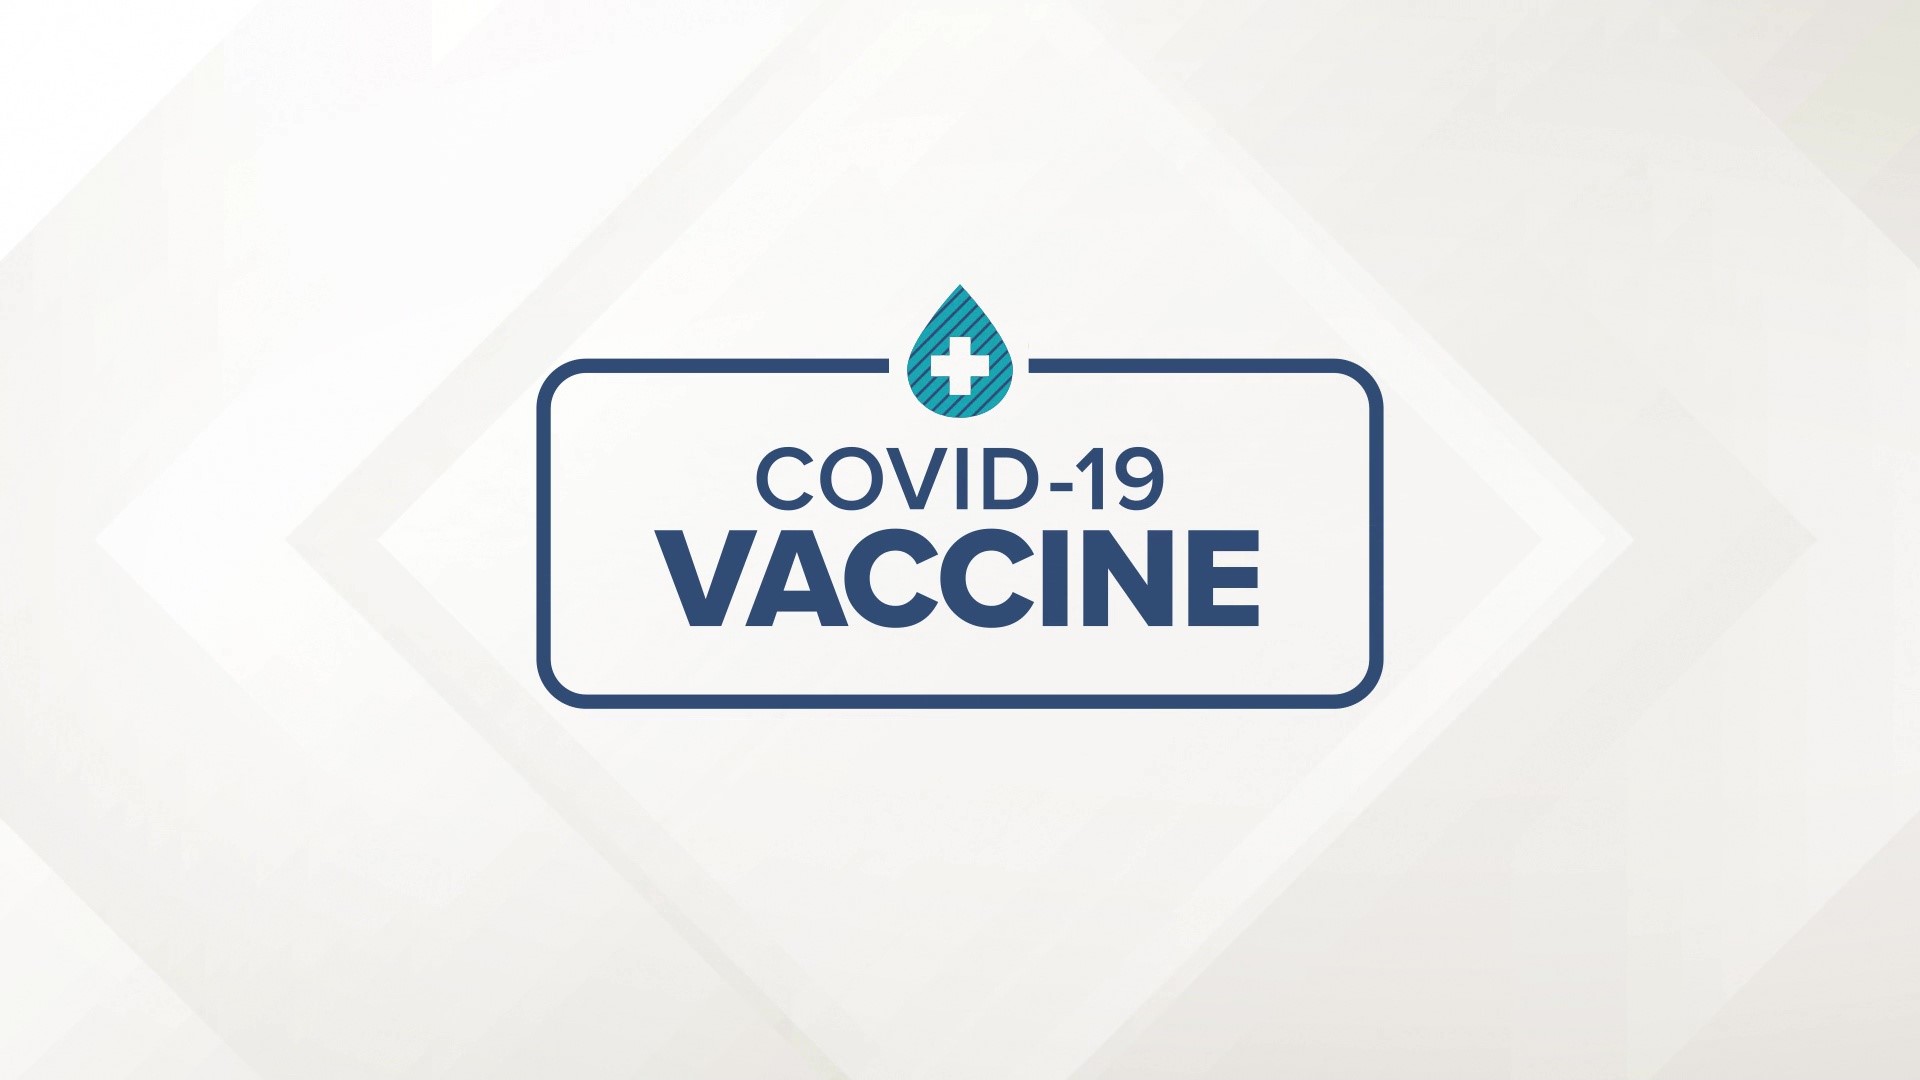 Those eligible under Phase 1B can schedule their vaccine appointments starting April 5.